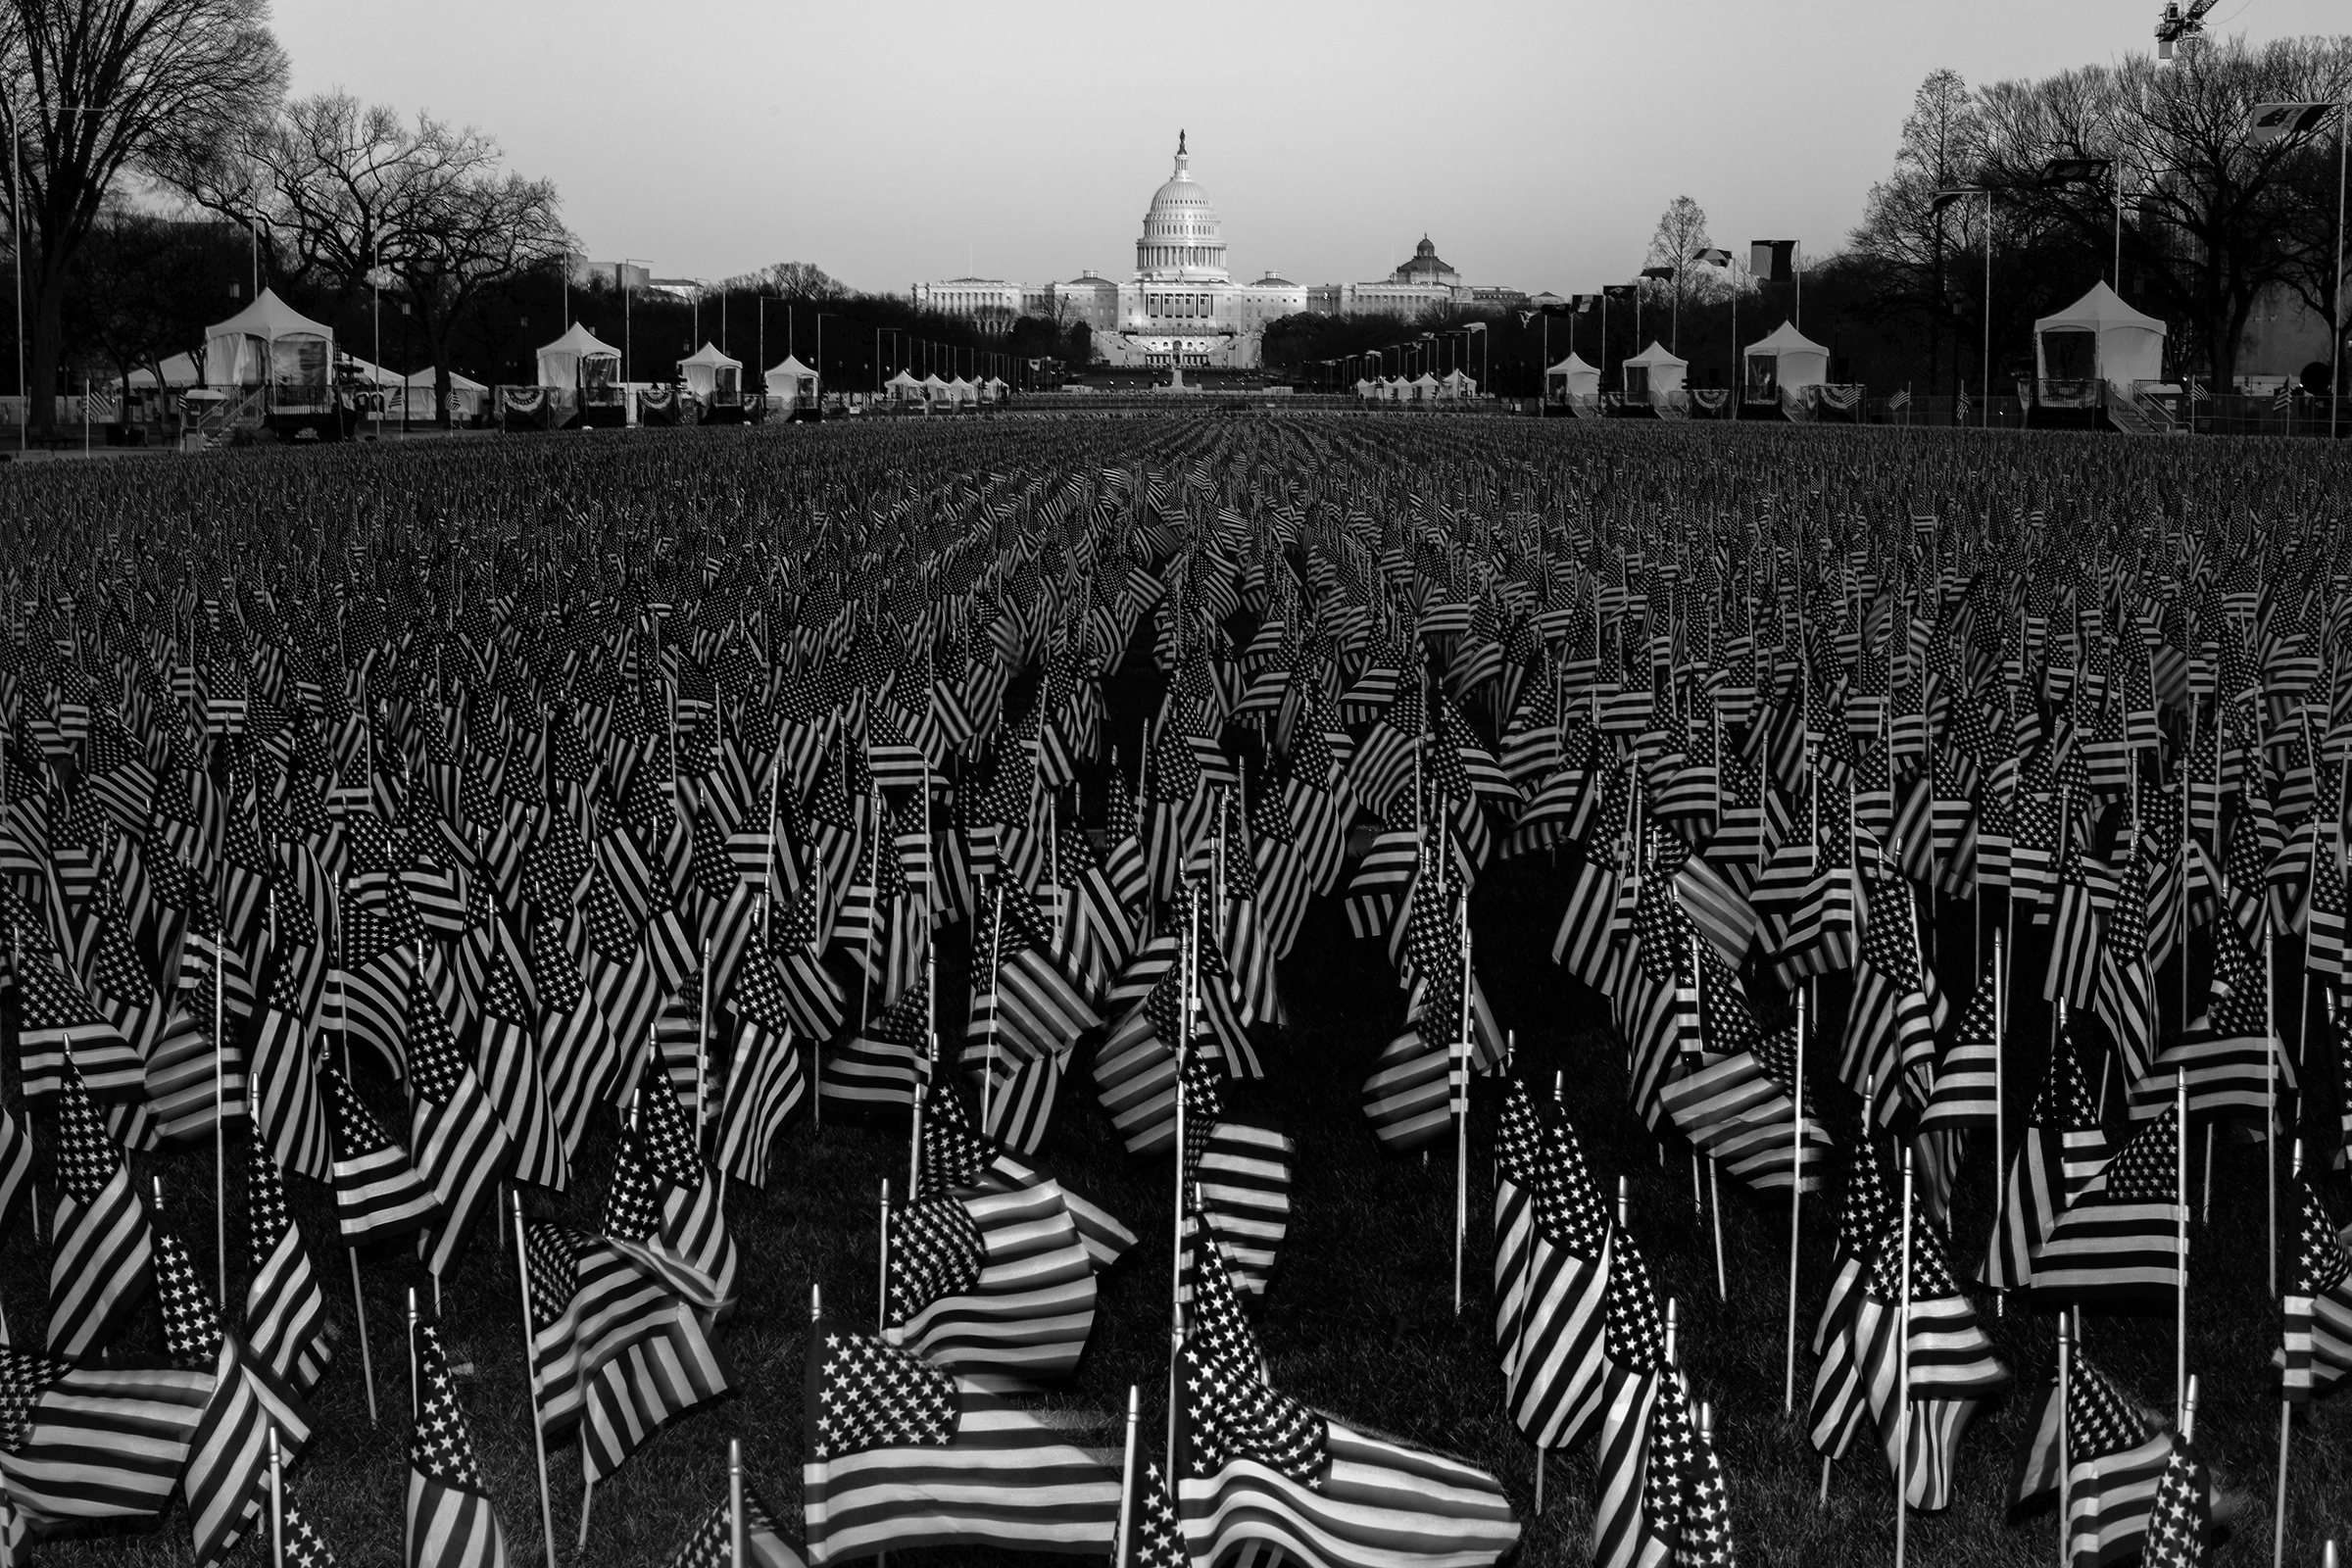 A field of flags on the National Mall in Washington, D.C., on Jan. 19, one day before the inauguration of President-elect Joe Biden and Vice President-elect Kamala Harris. The public art display featured nearly 200,000 flags, representing Americans who would have gathered for the inauguration, according to the organizing committee. (Philip Montgomery for TIME)